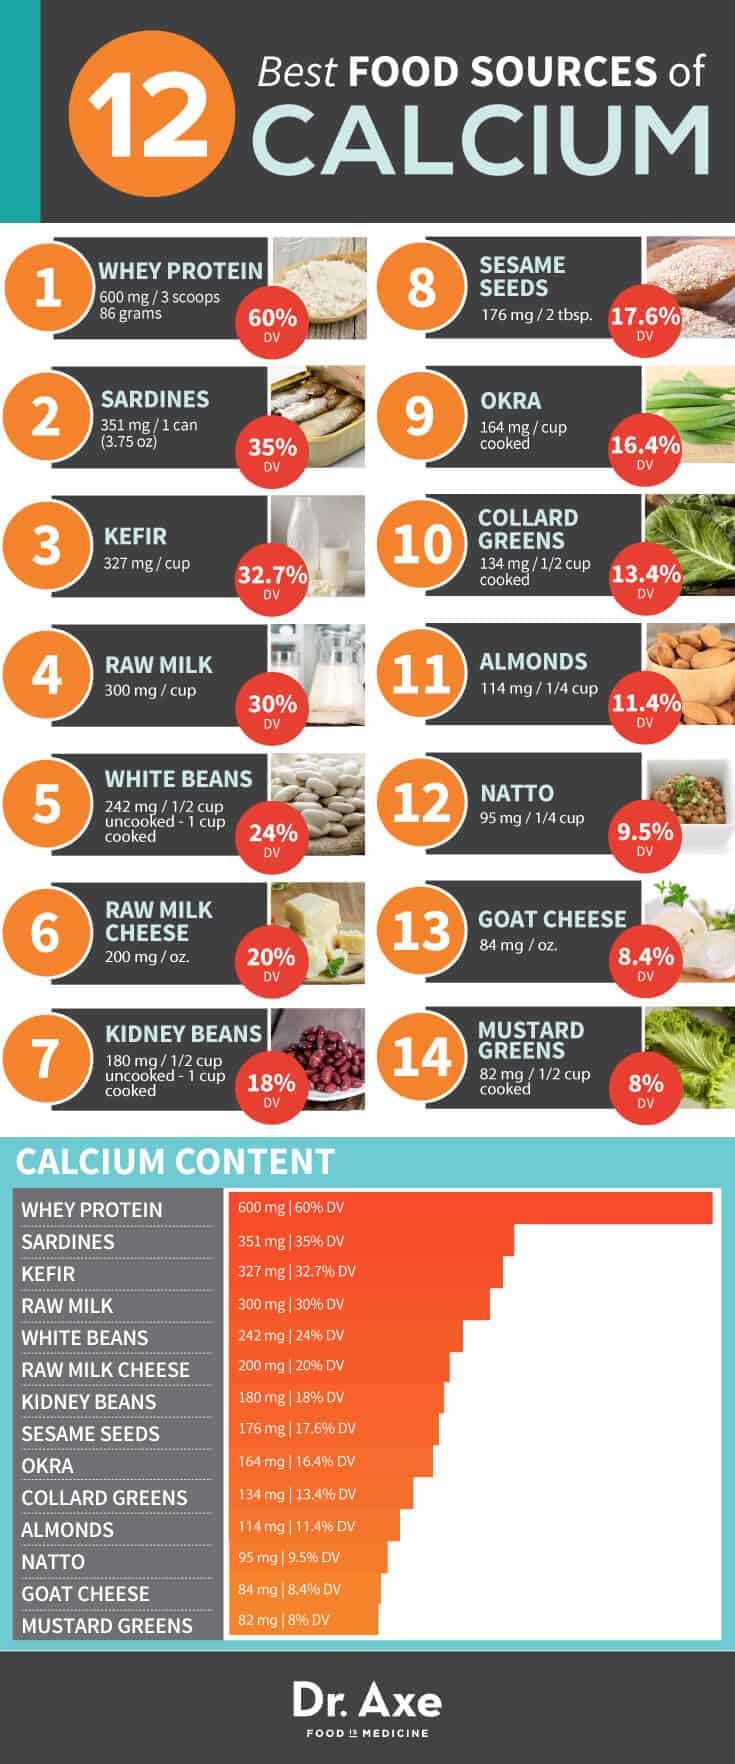 What food should you avoid in a low-calcium diet?